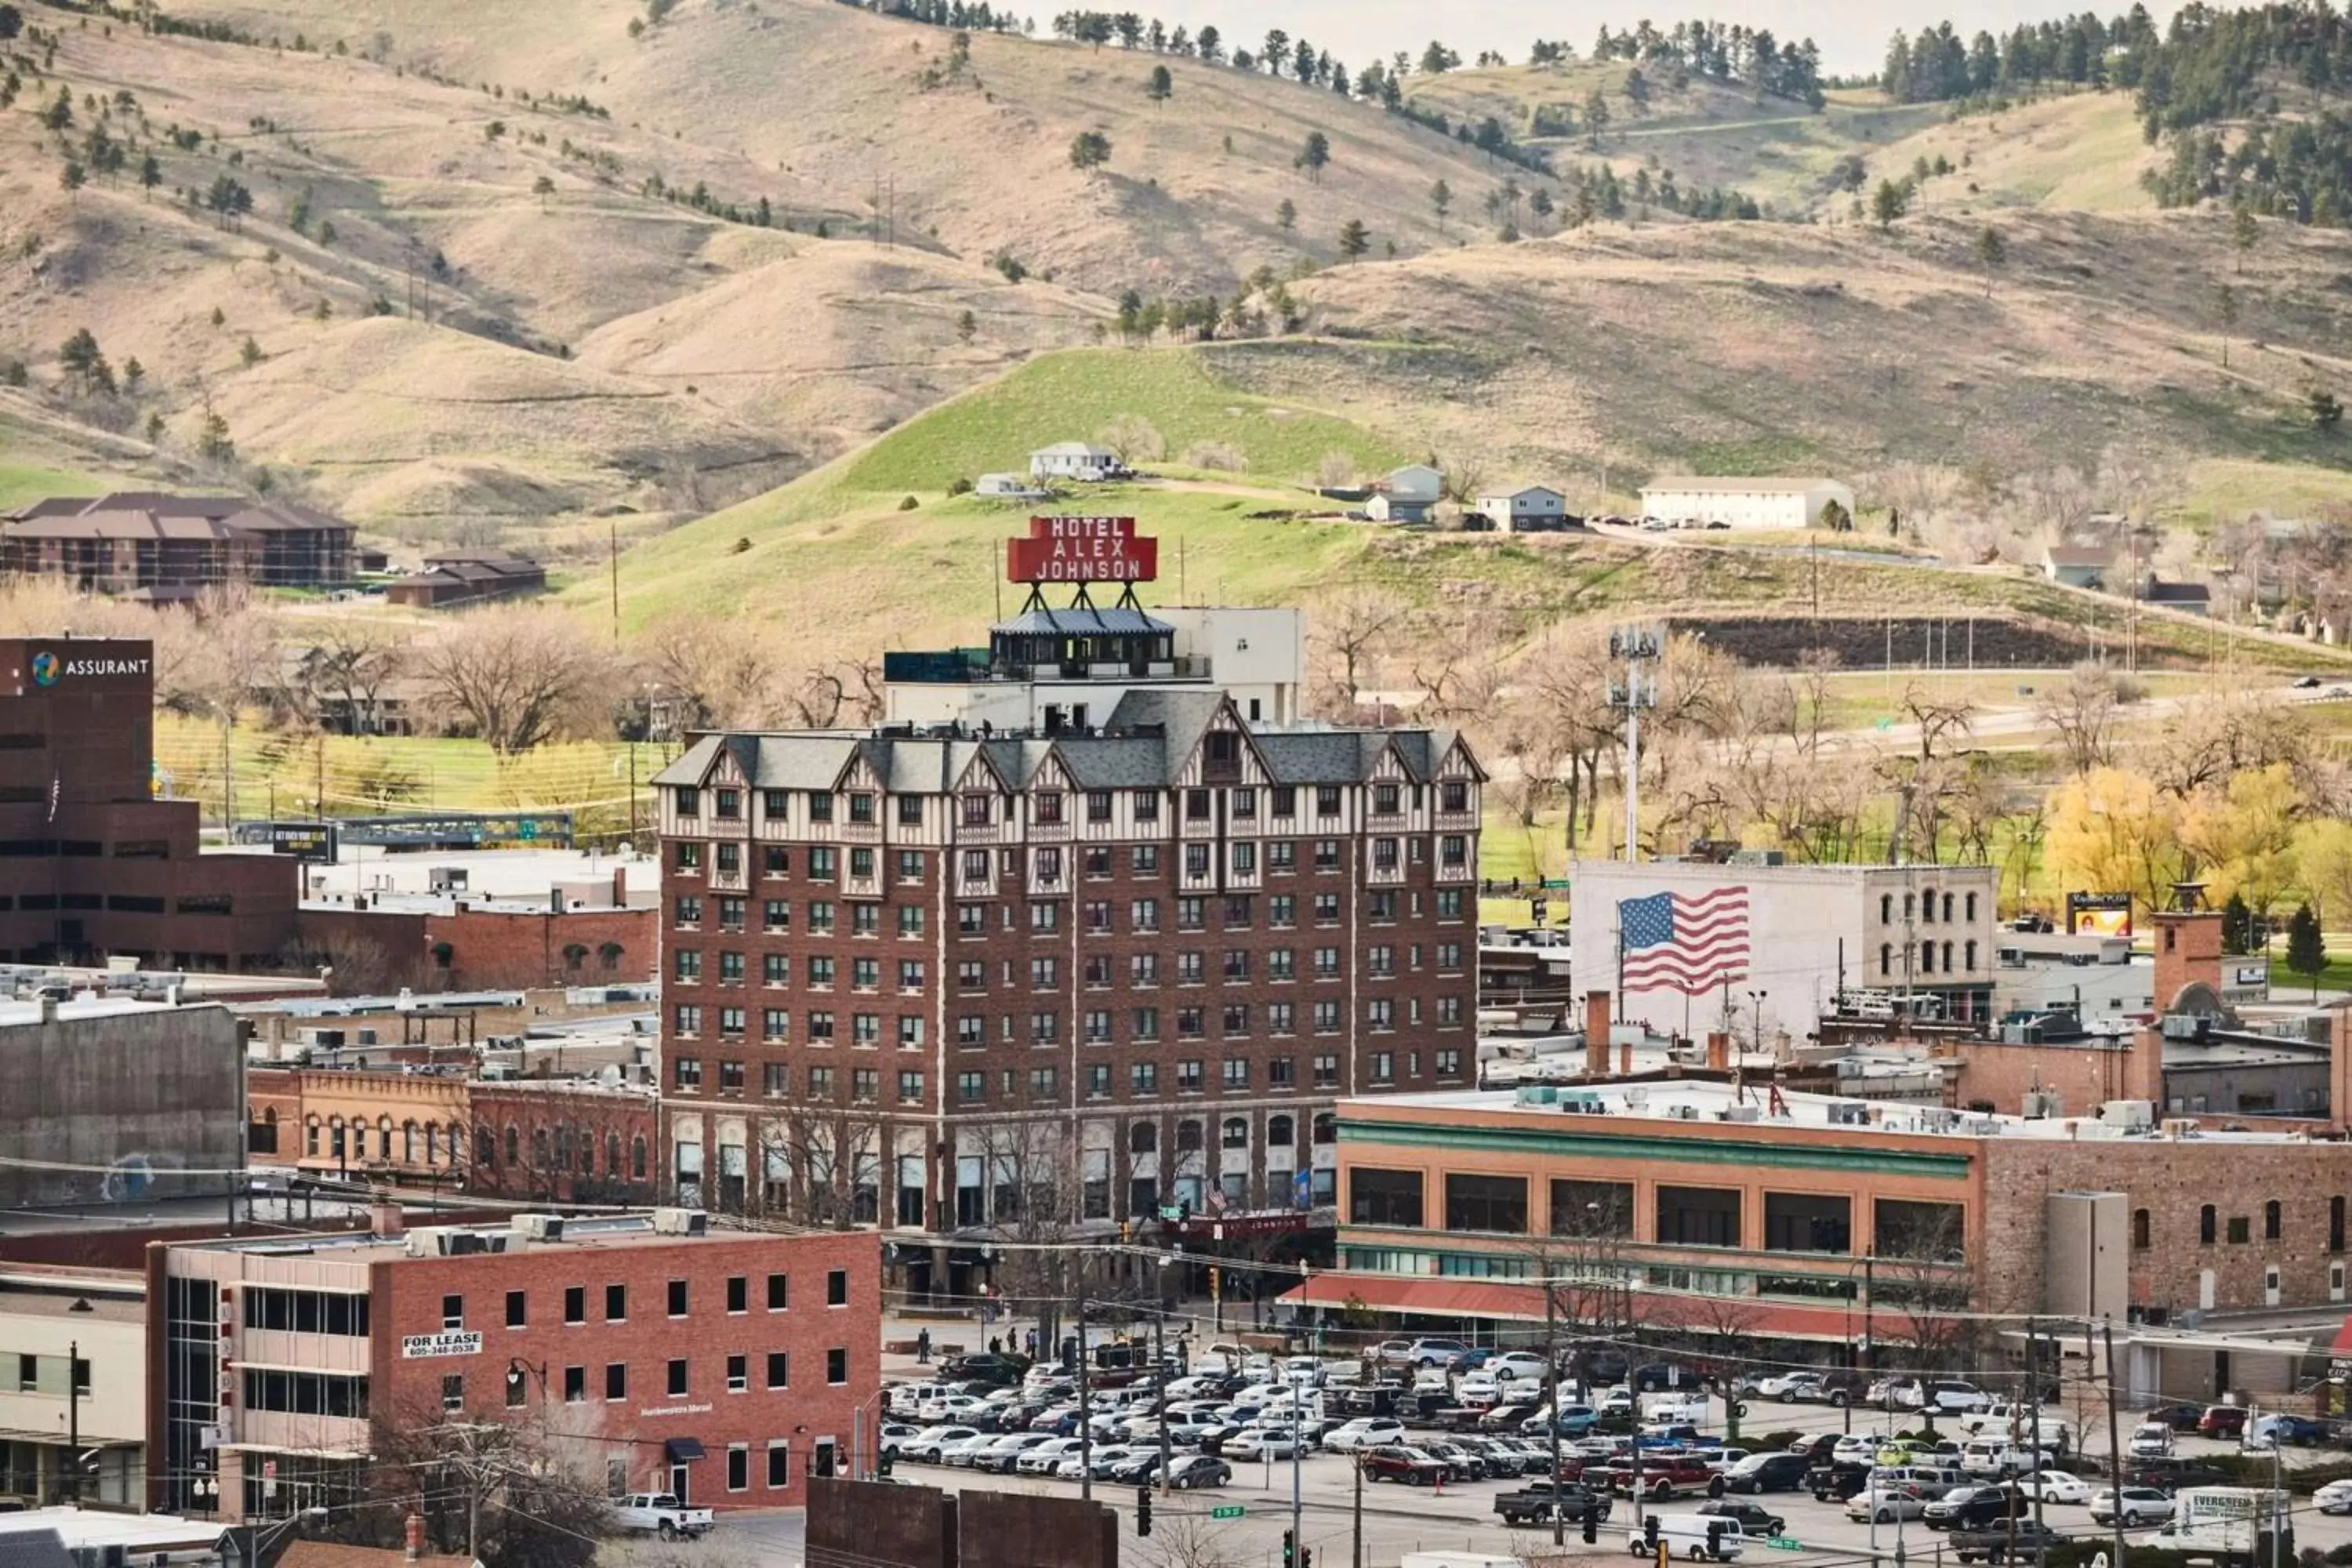 Property building in Hotel Alex Johnson Rapid City, Curio Collection by Hilton